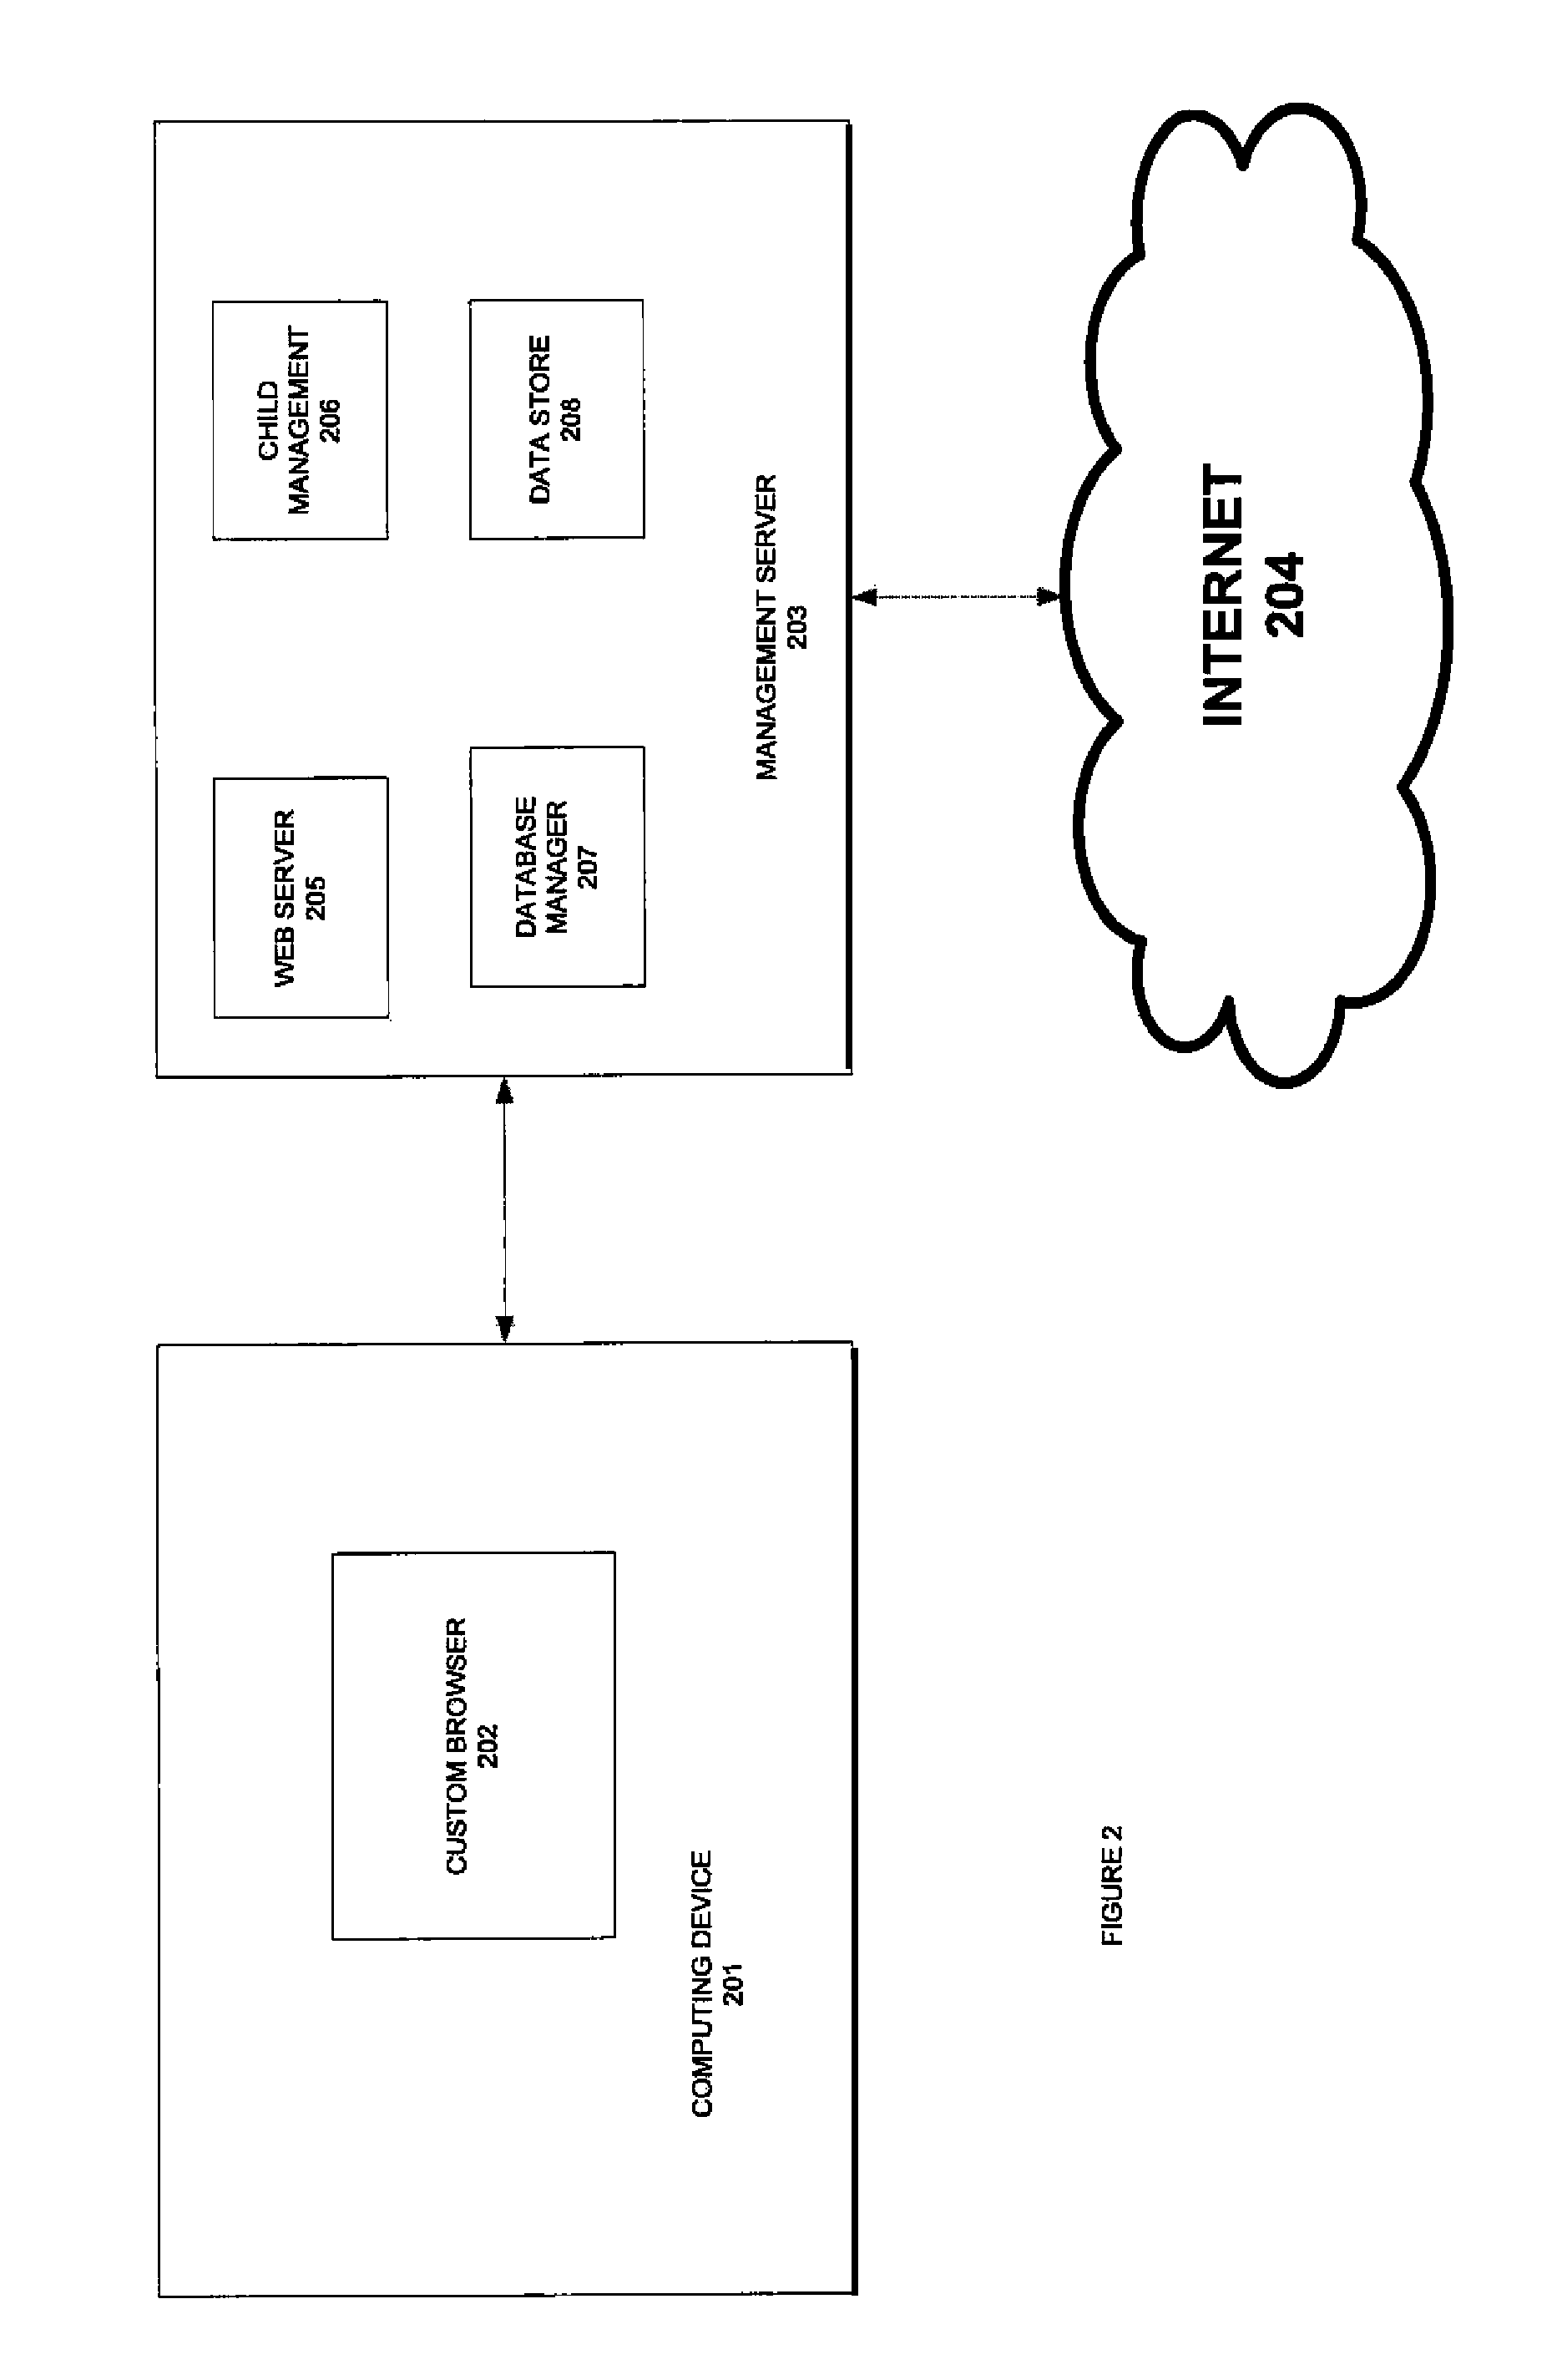 Method and apparatus for editing, filtering, ranking, and approving content